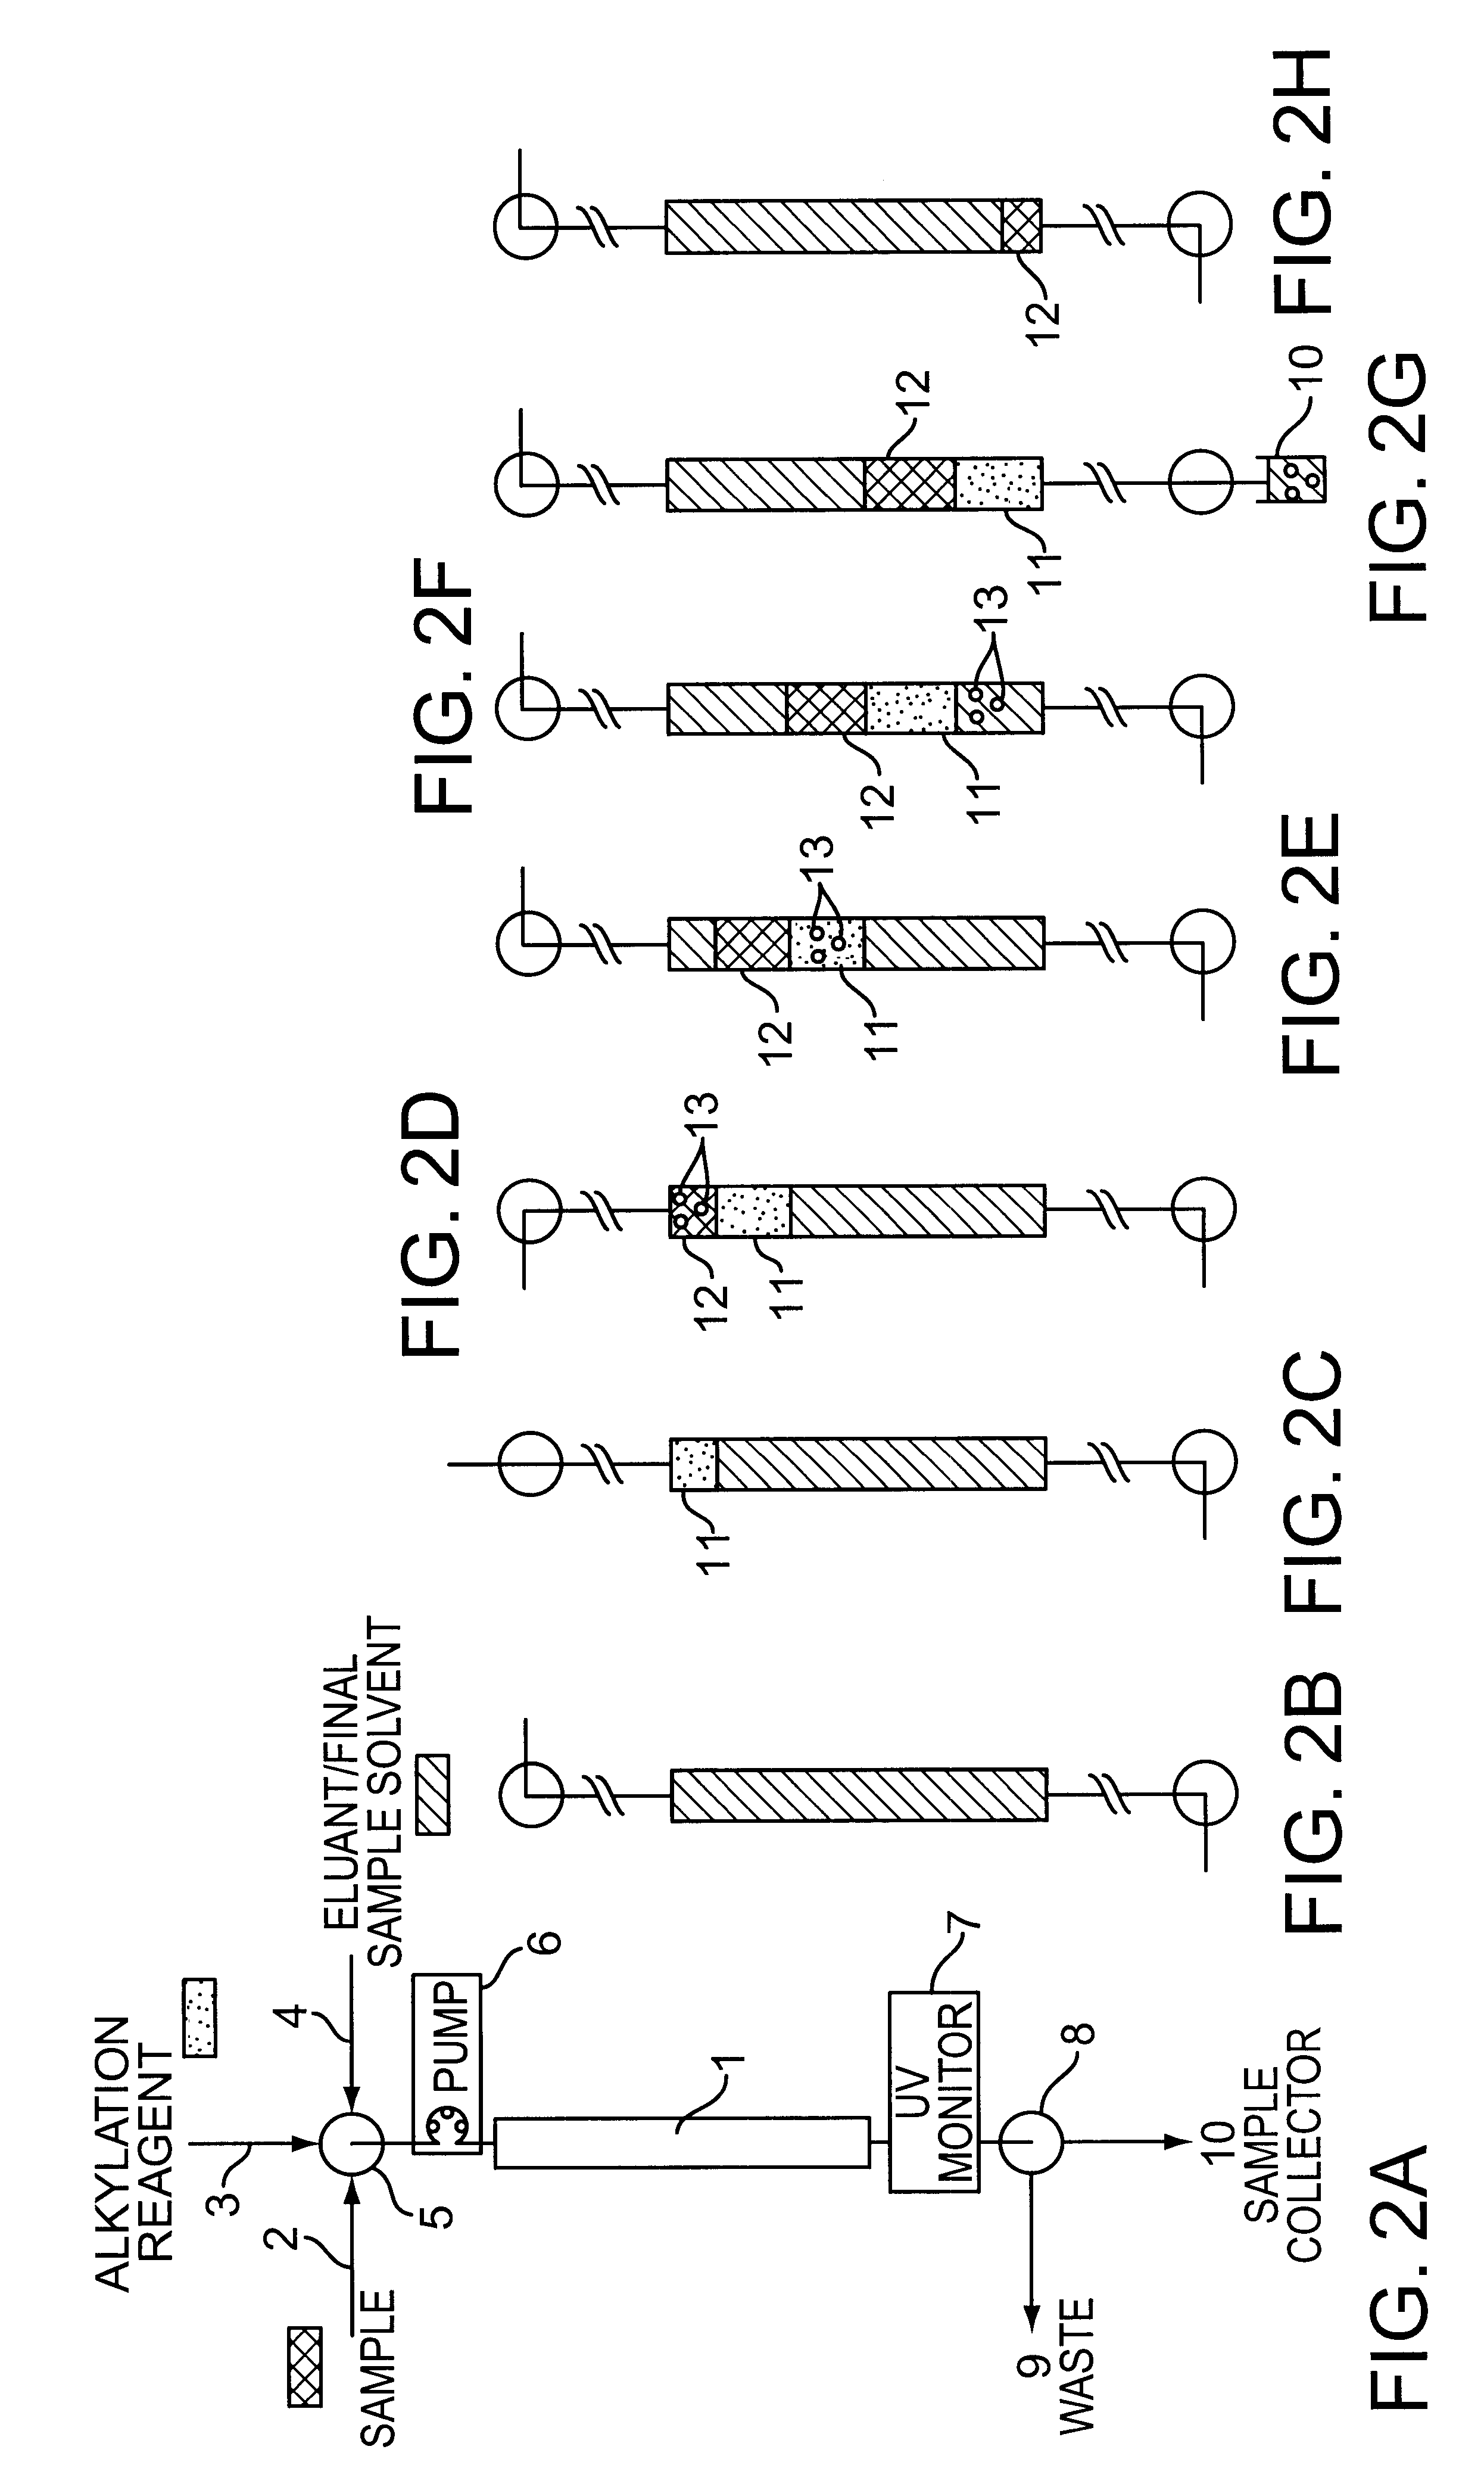 Automated system for two-dimensional electrophoresis